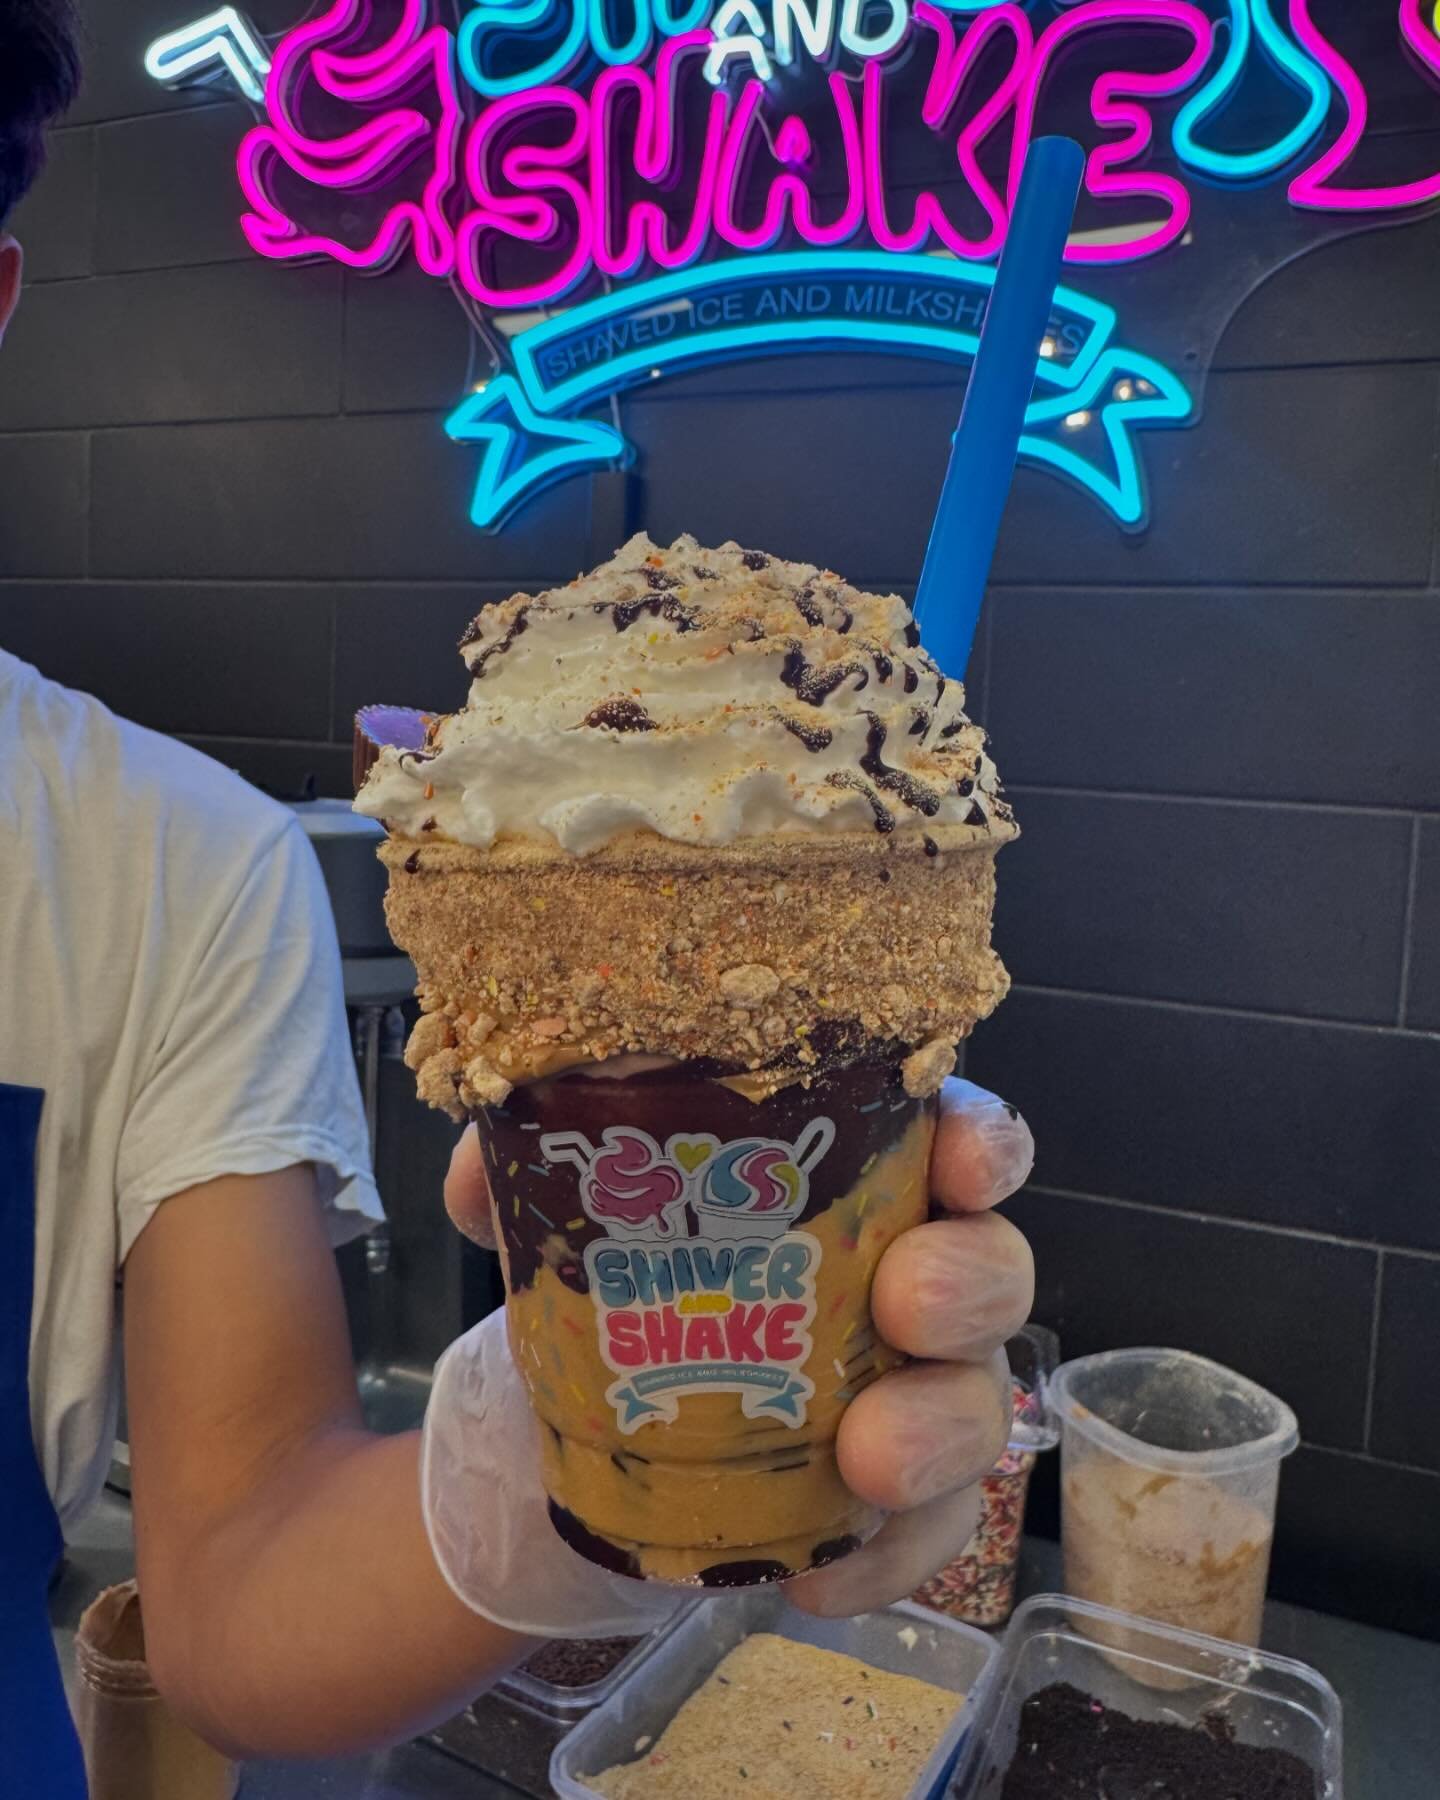 Ok guys, the staff is having a competition&hellip;which one of these looks the best?

A. Peanut butter explosion shake
B. Oreo crazy shake
C. Mango&ntilde;ada shaved ice

Let us know 👇👇